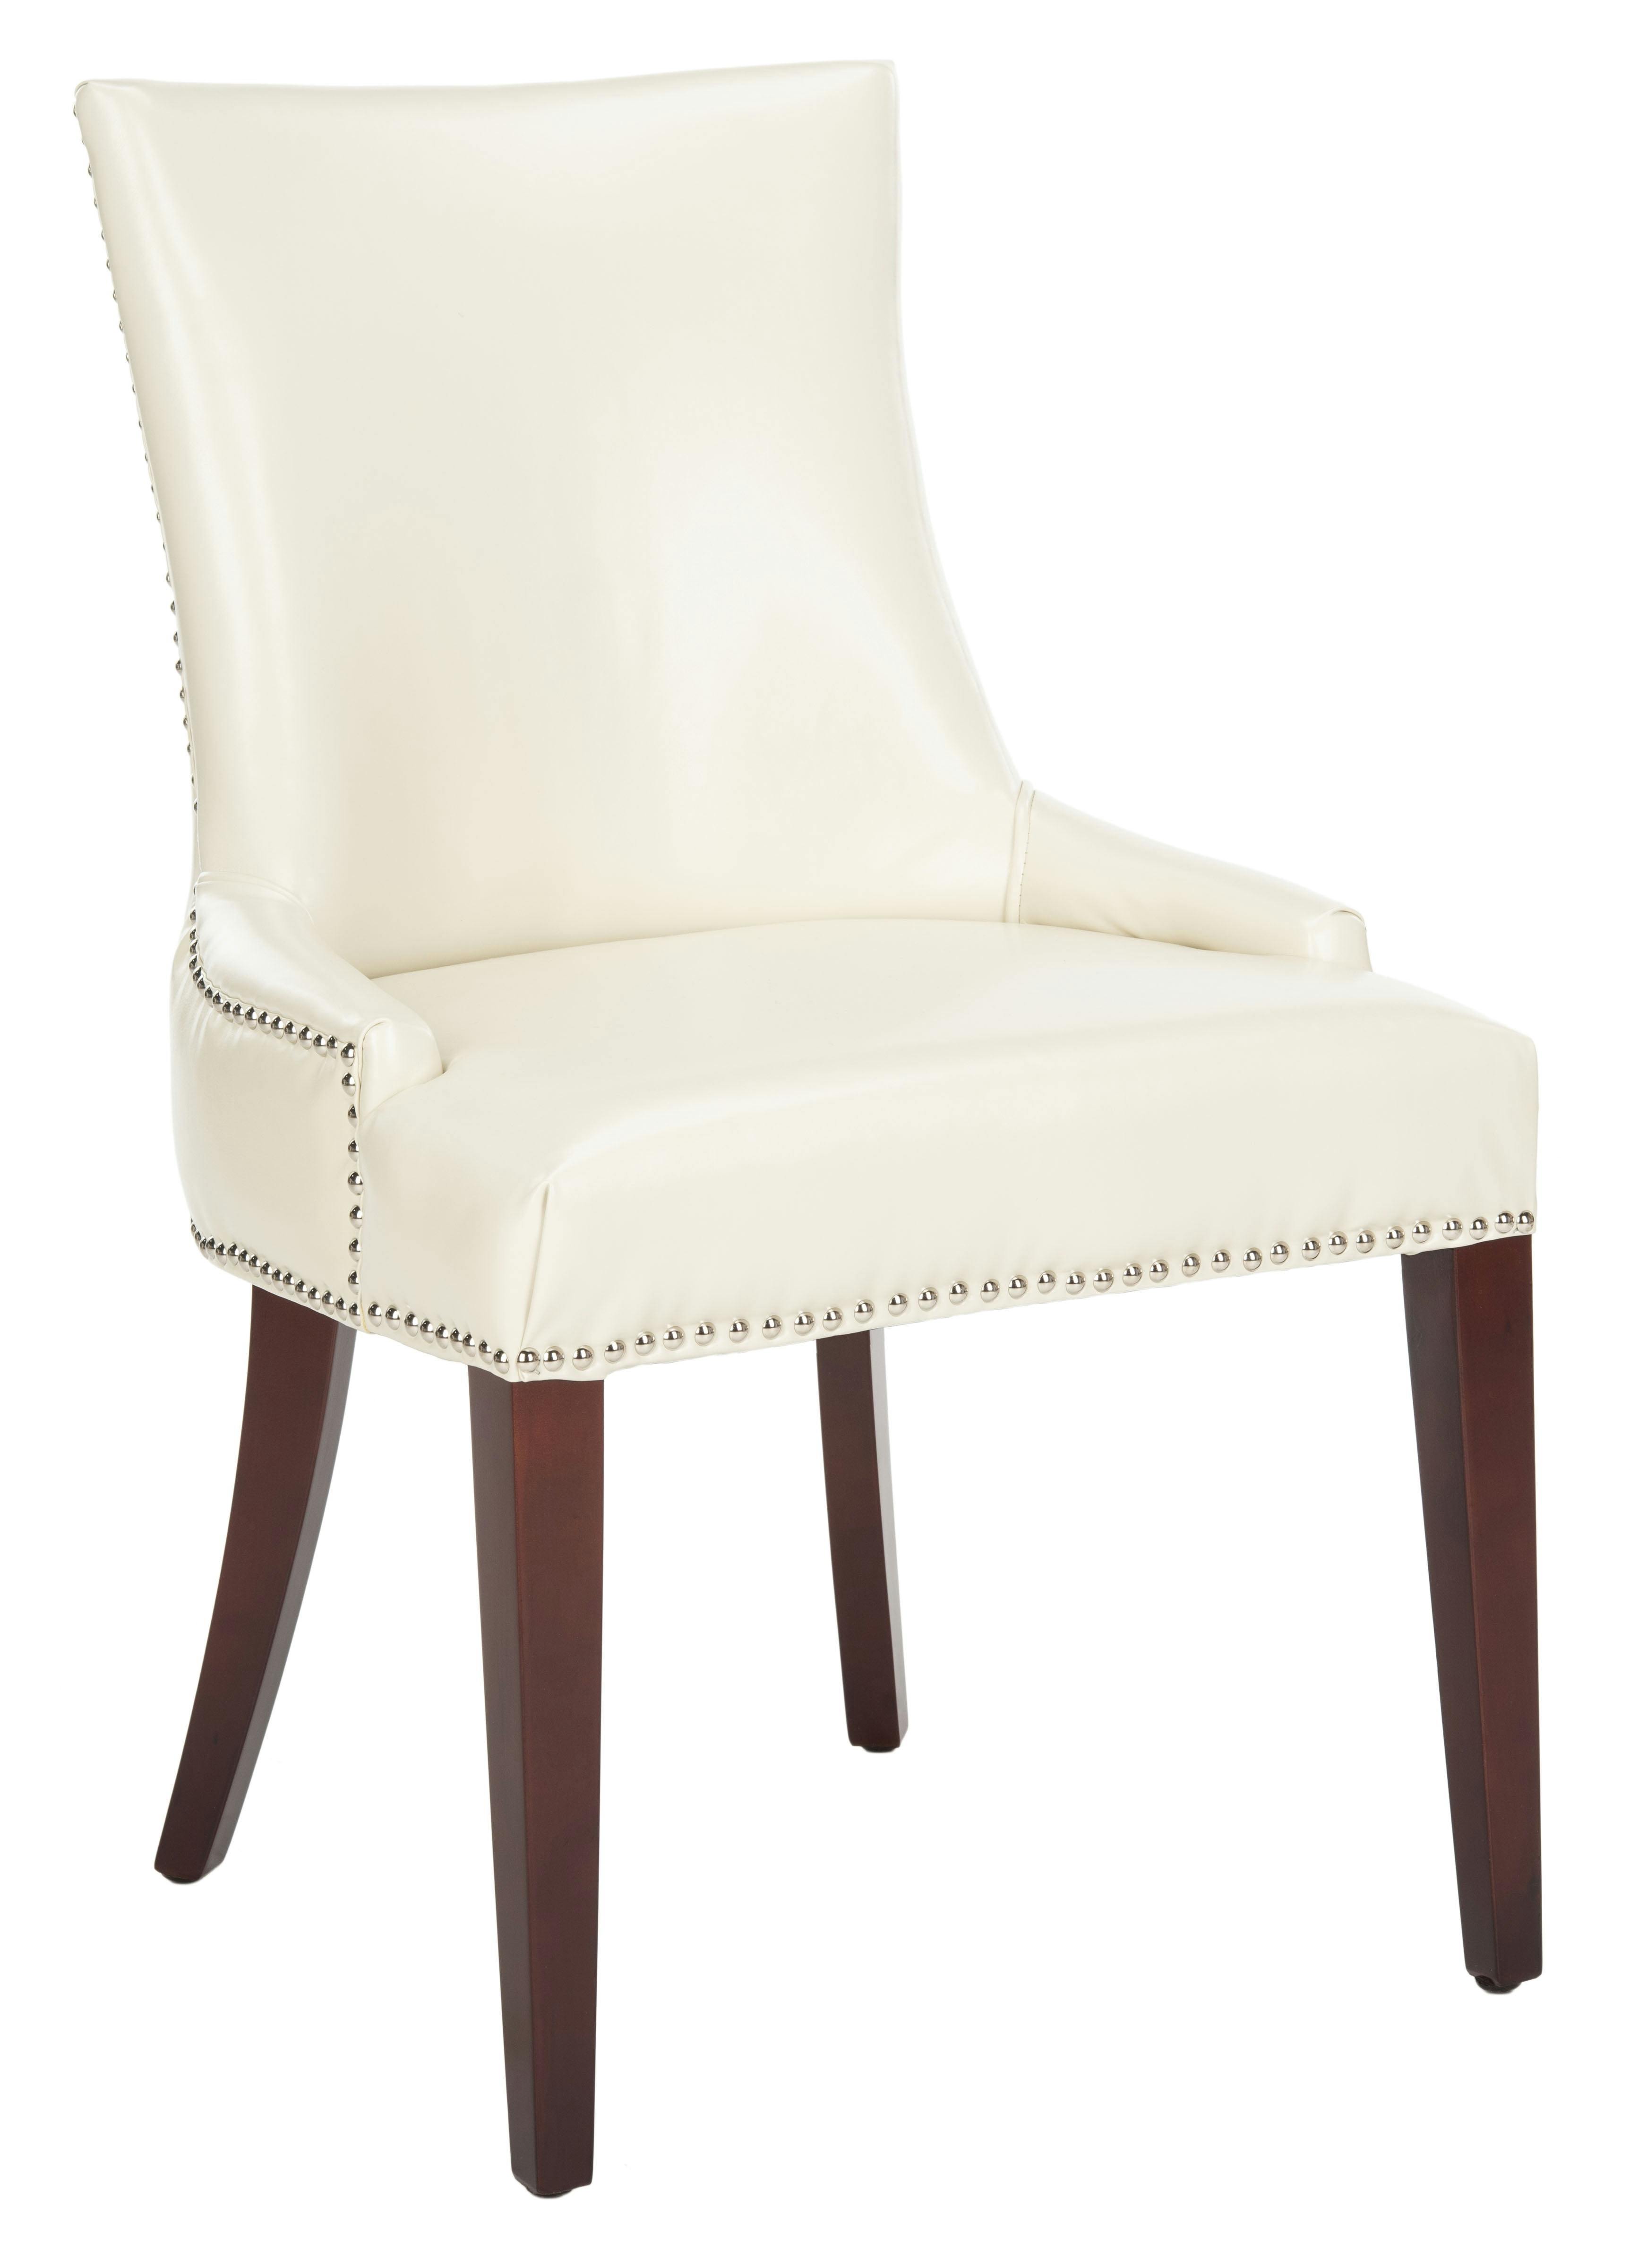 Elegant Cream Leather Upholstered Parsons Side Chair with Birch Wood Legs